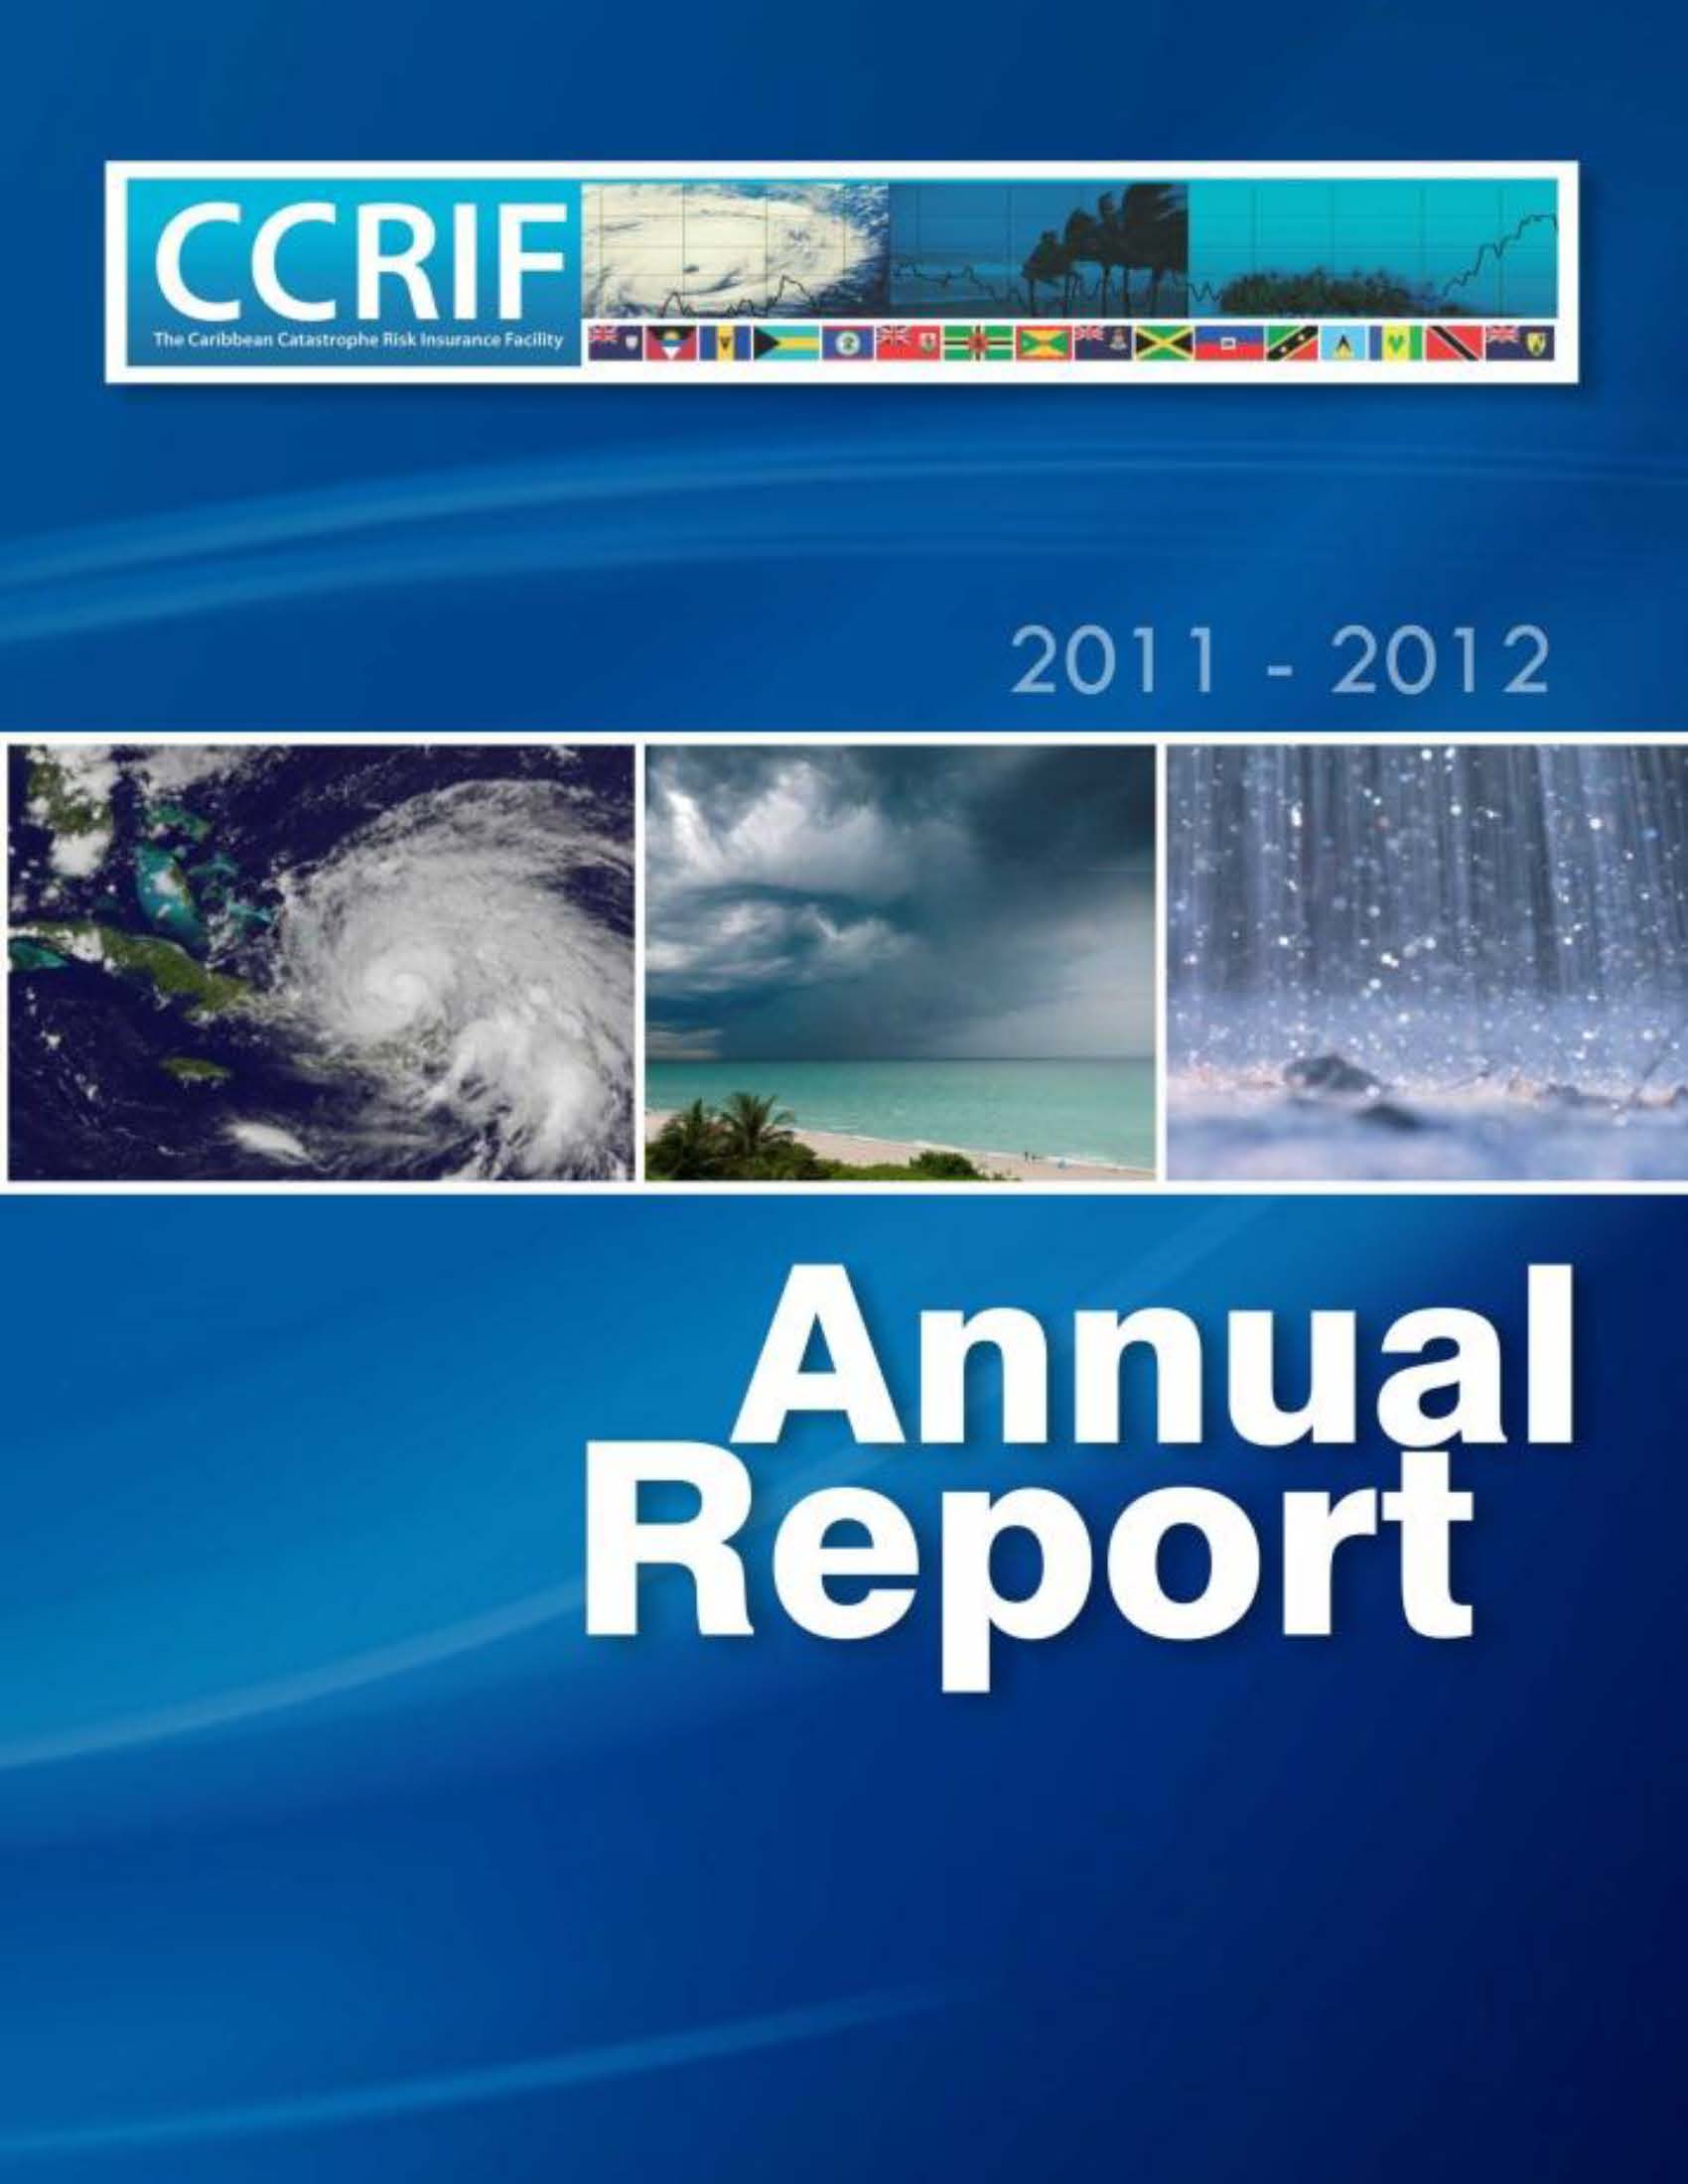 CCRIF Annual Report 2011-2012